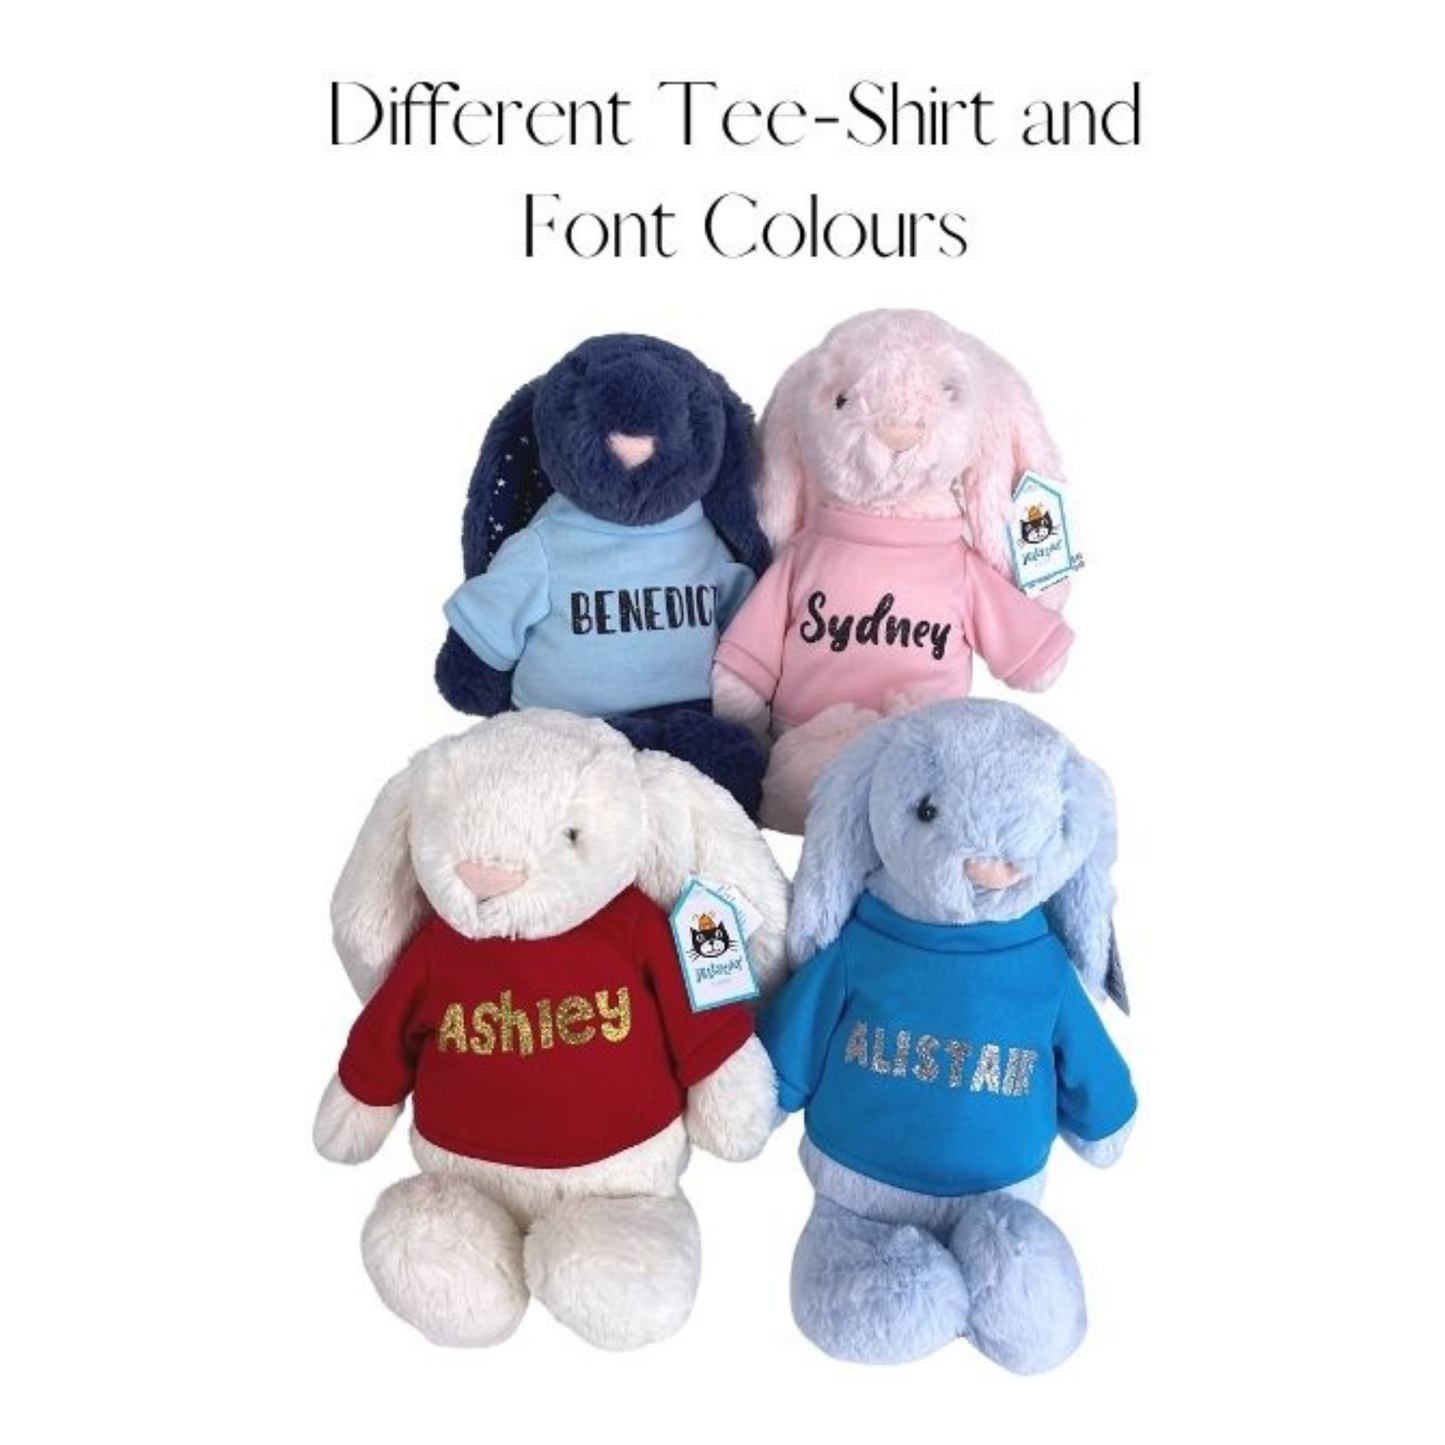 Personalized Jellycat Tee Shirts for Plush Toys (Plush not included)